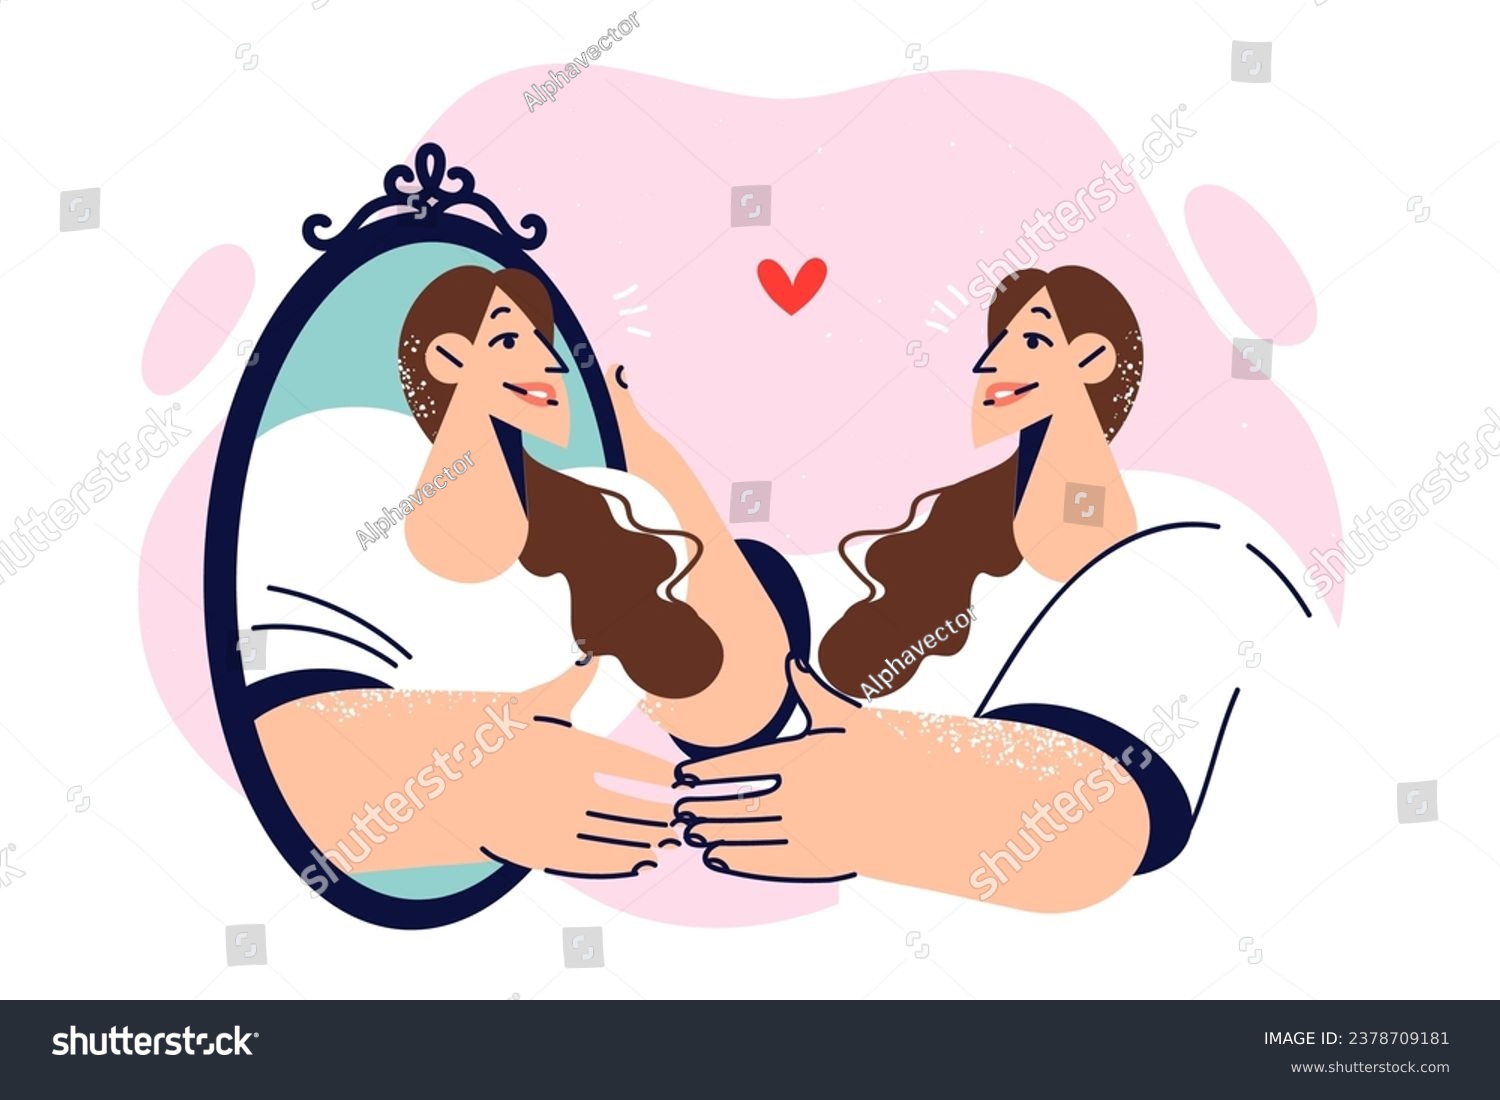 SVG of Woman looks in mirror rejoicing to see herself reflected, for concept of narcissism and self-admiration. Girl practices speaking standing in front of mirror, before declaring love to guy she likes. svg